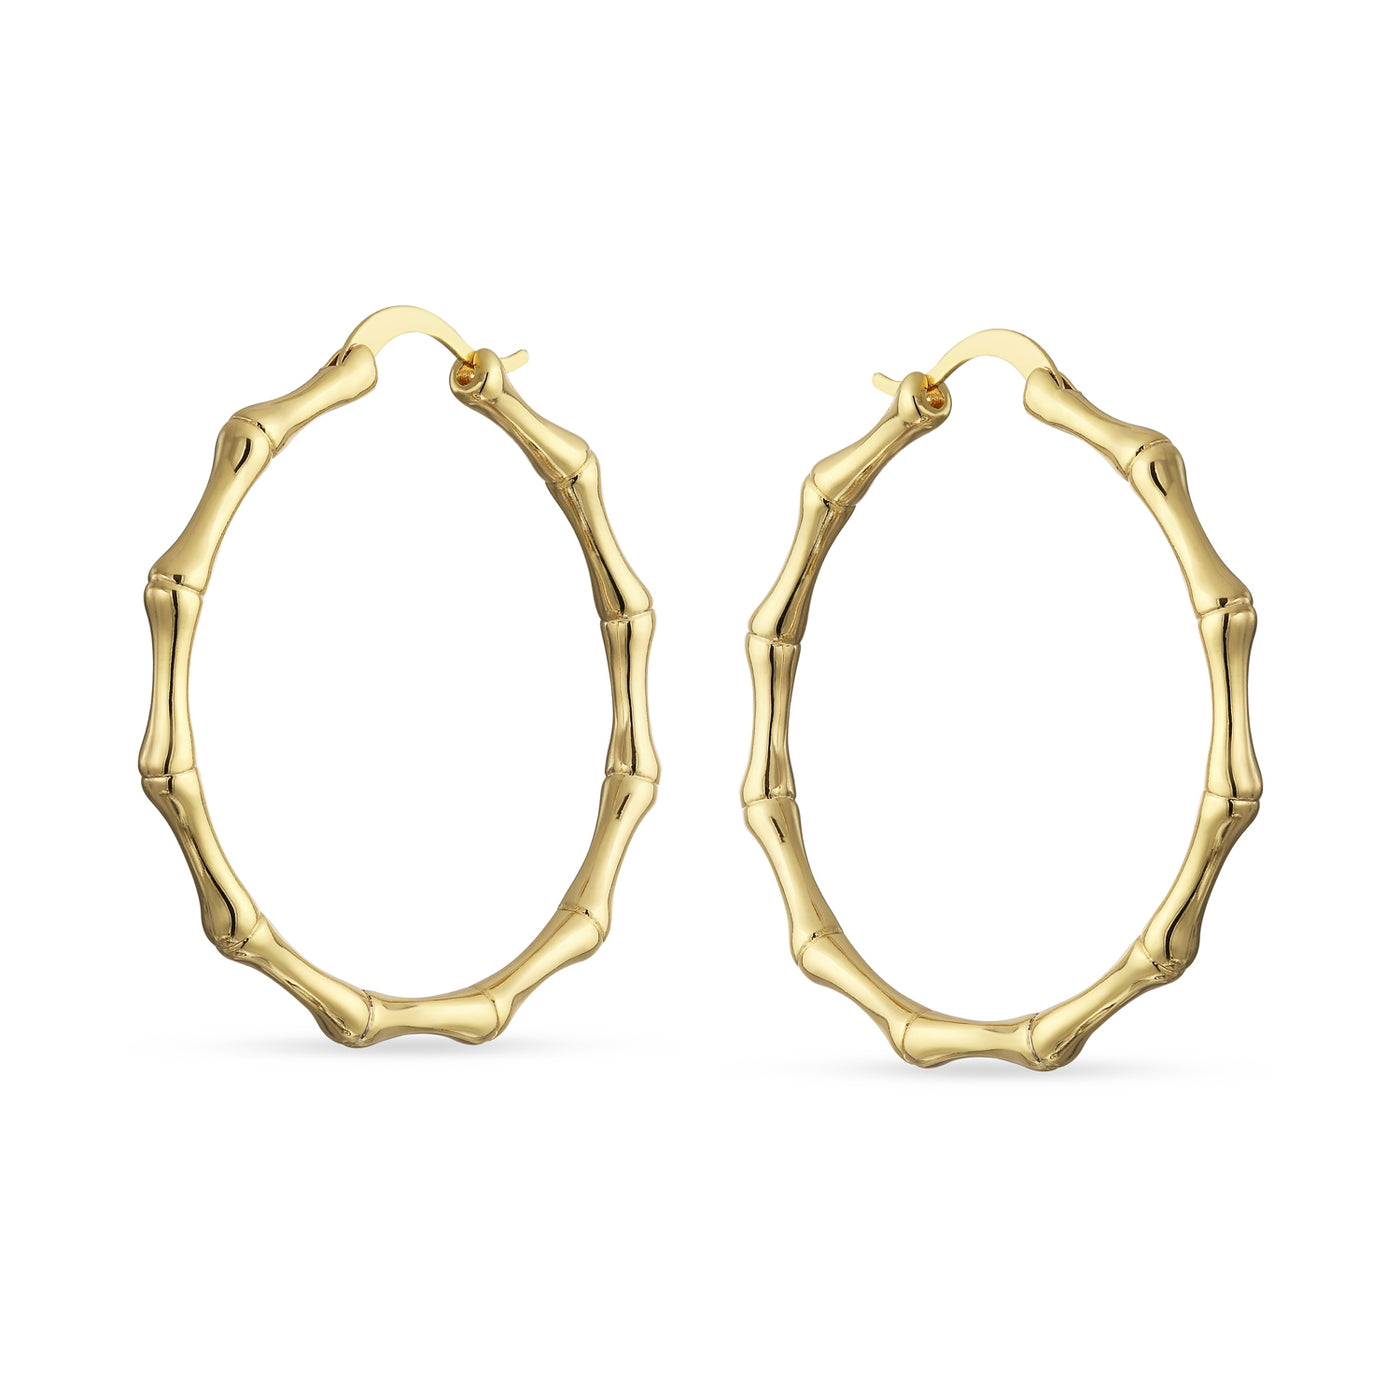 Light Weight Big Bamboo Hoop Earrings Gold Plated 3 Sizes